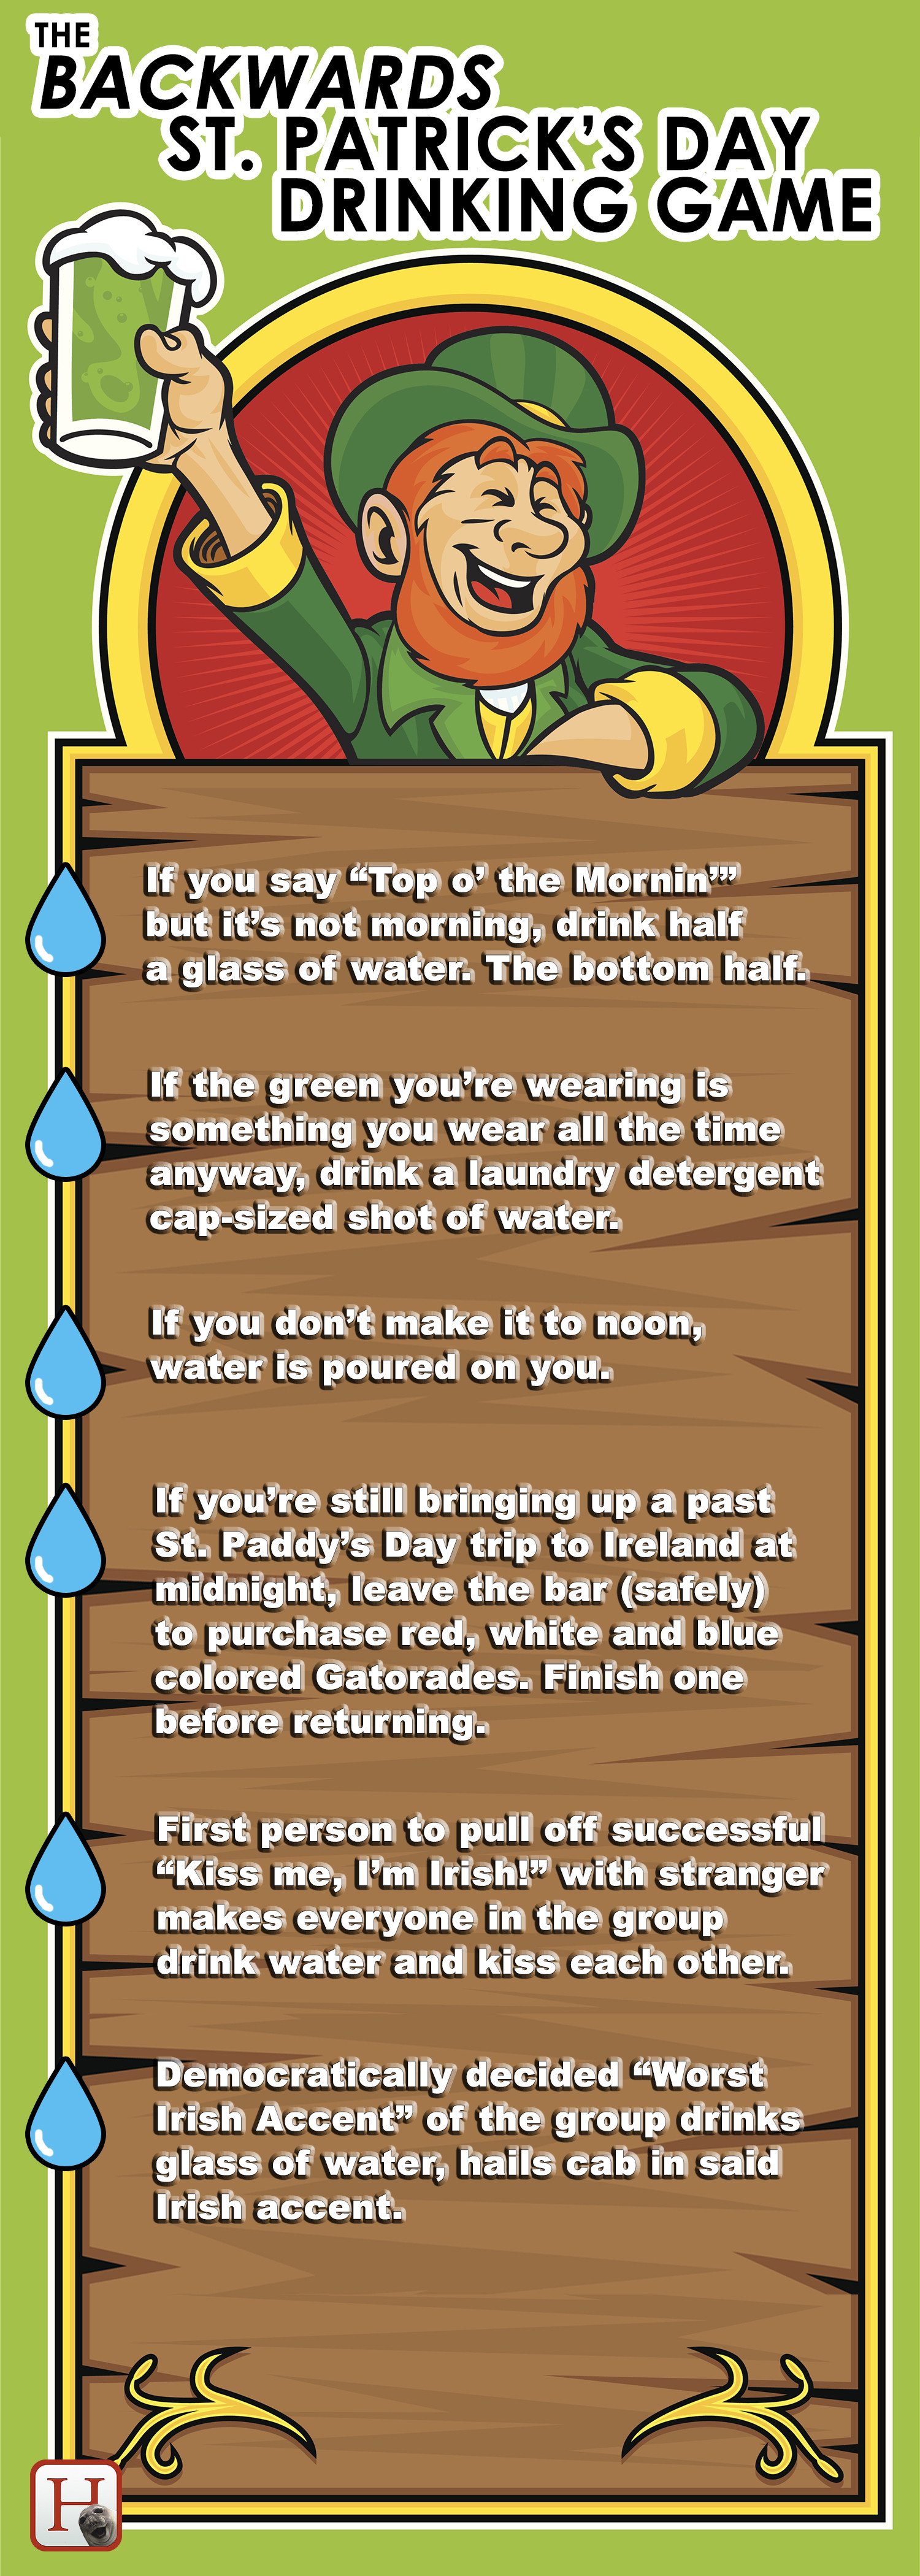 The Only St. Patrick's Day Drinking Game That Could